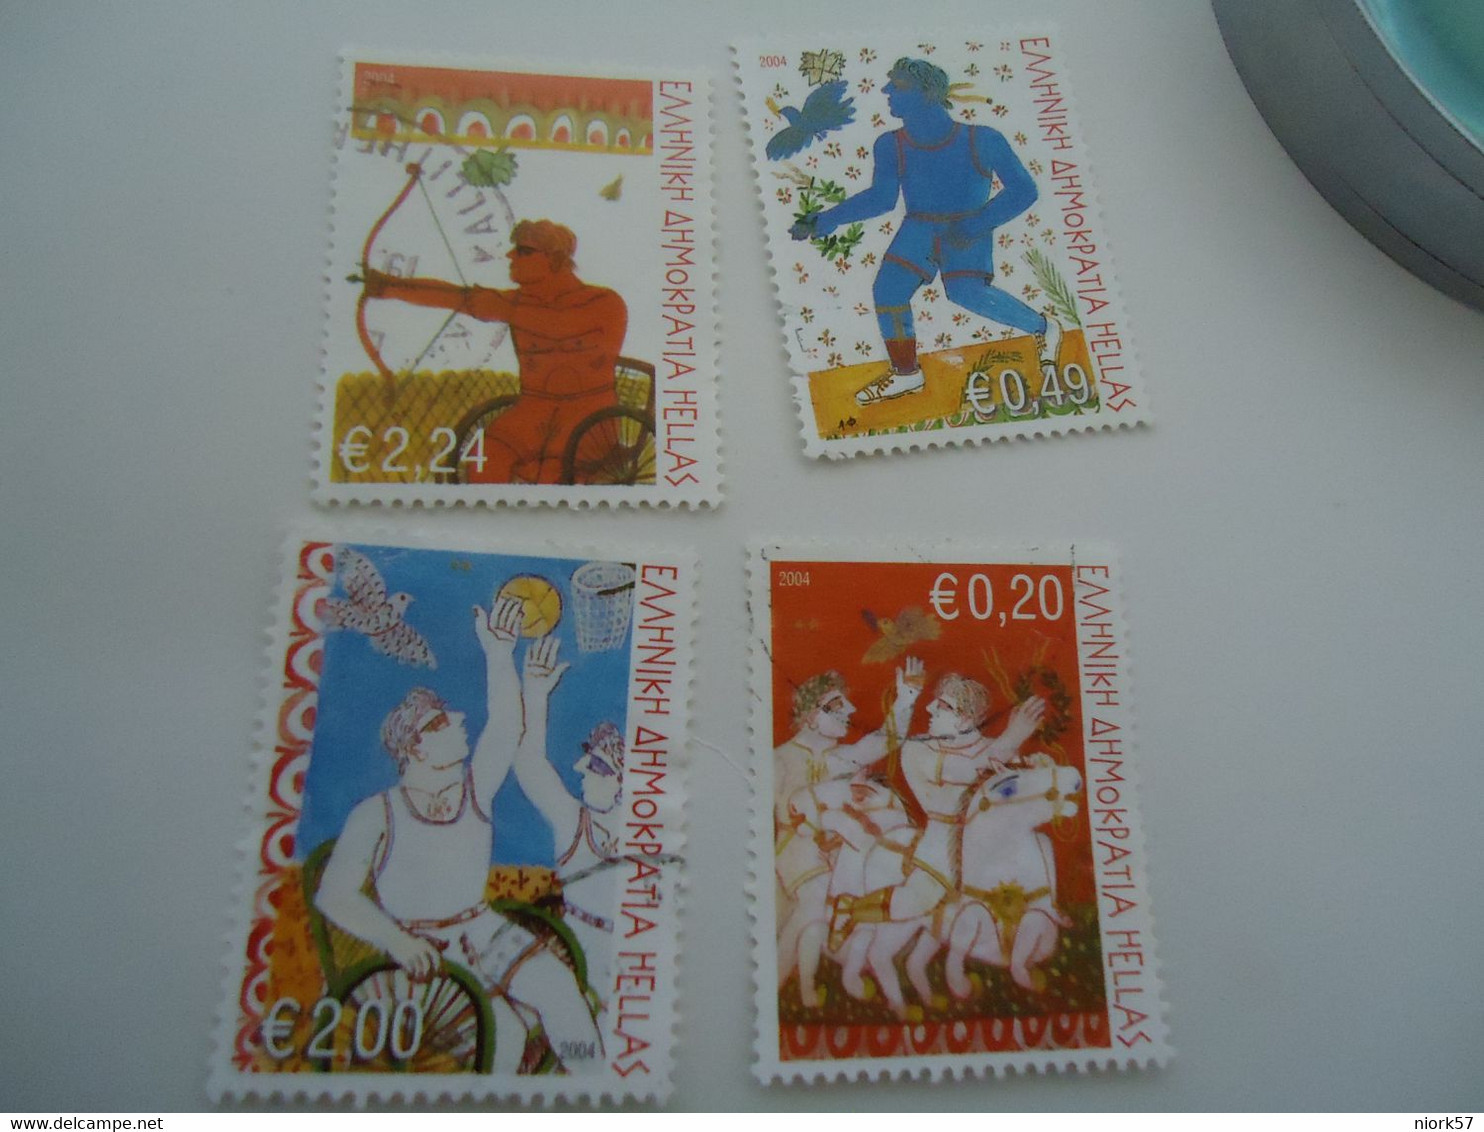 GREECE USED STAMPS SET 4 OLYMPIG GAMES ATHENS 2004 POWER OF WILL - Zomer 2004: Athene - Paralympics